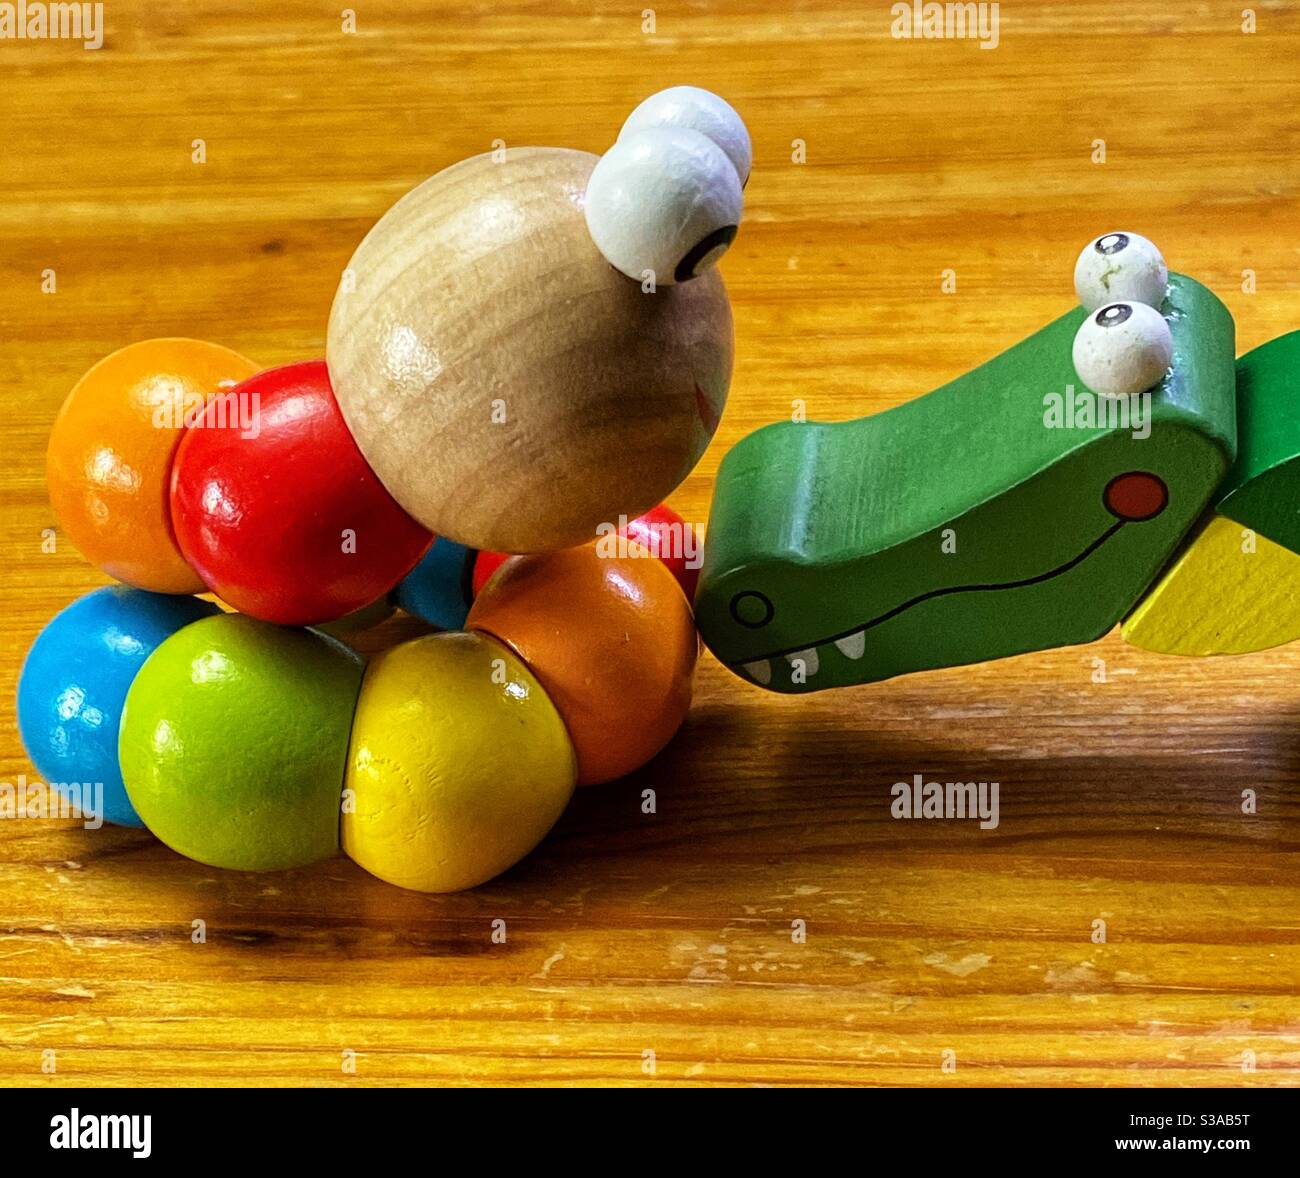 Green wooden toy crocodile comes face to face with a multi coloured wooden toy caterpillar on a pine table Stock Photo